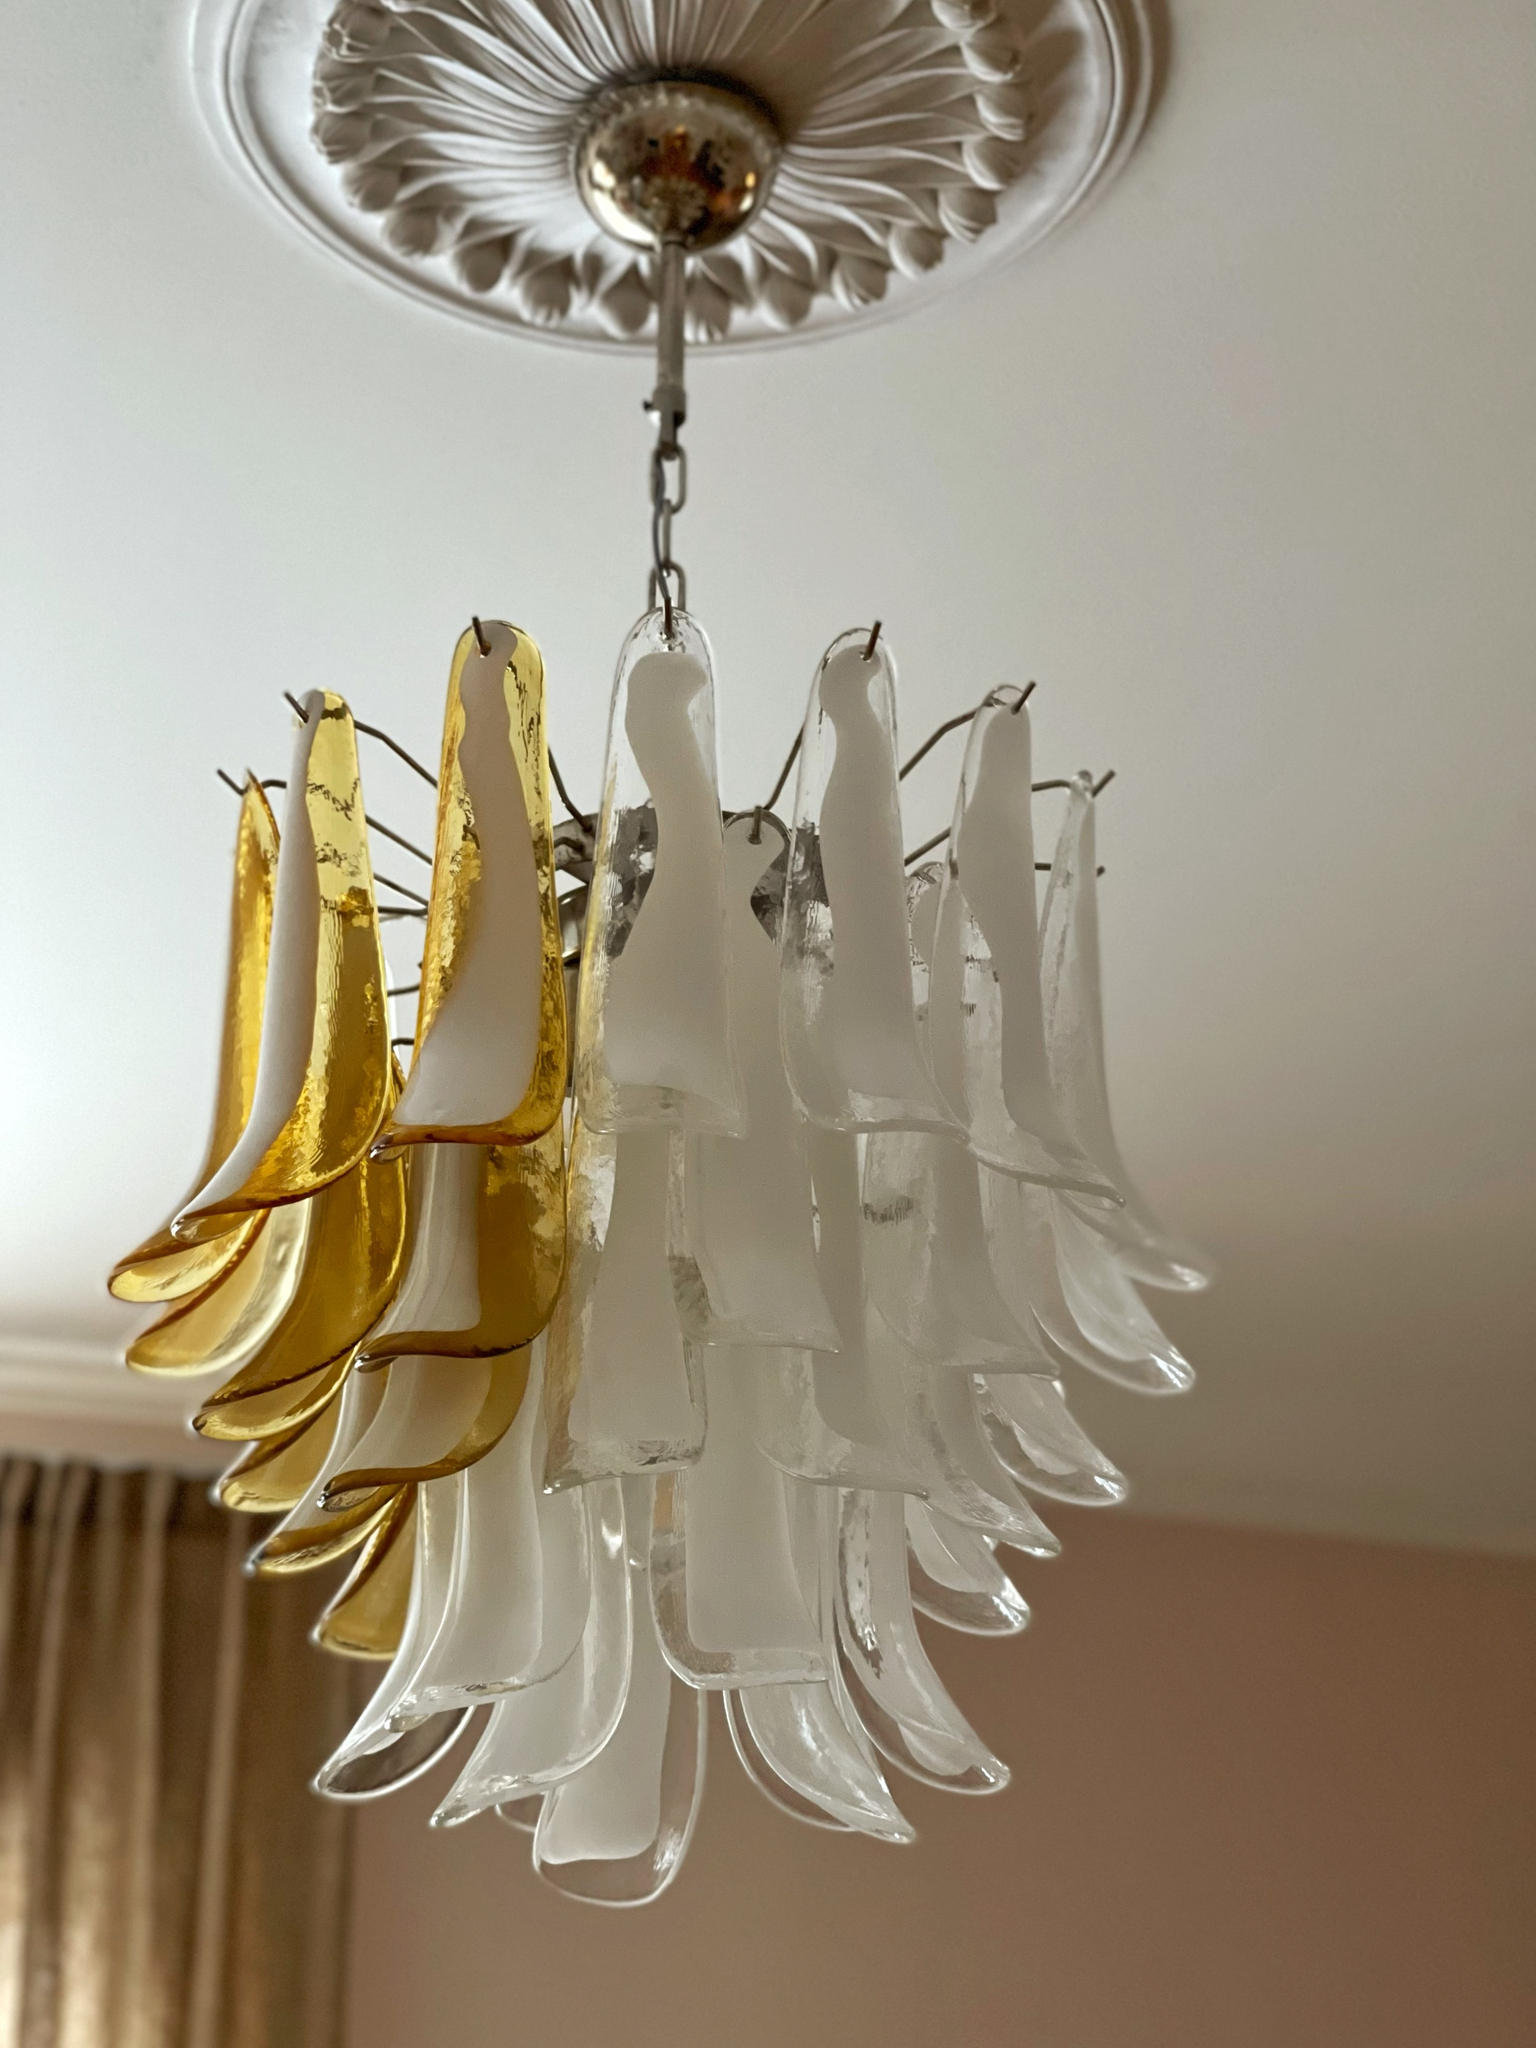 Murano Chandelier - Mazzega Style - Large - Mixed Prisms.